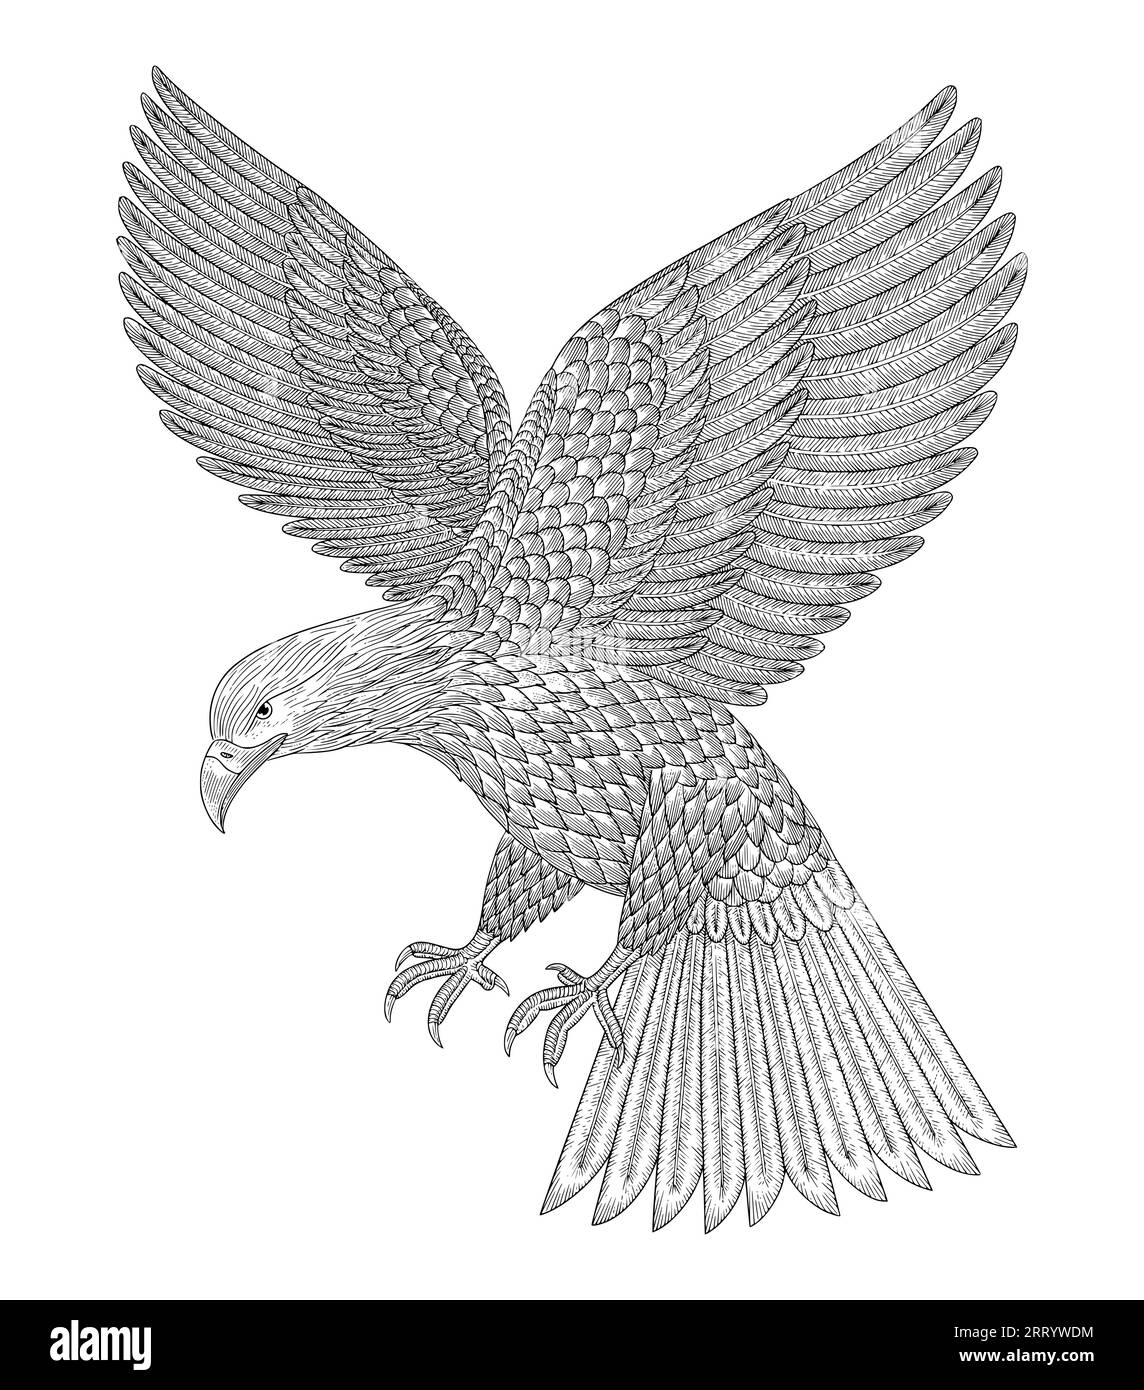 Bald eagle flying attacking, Vintage engraving drawing style vector illustration Stock Vector